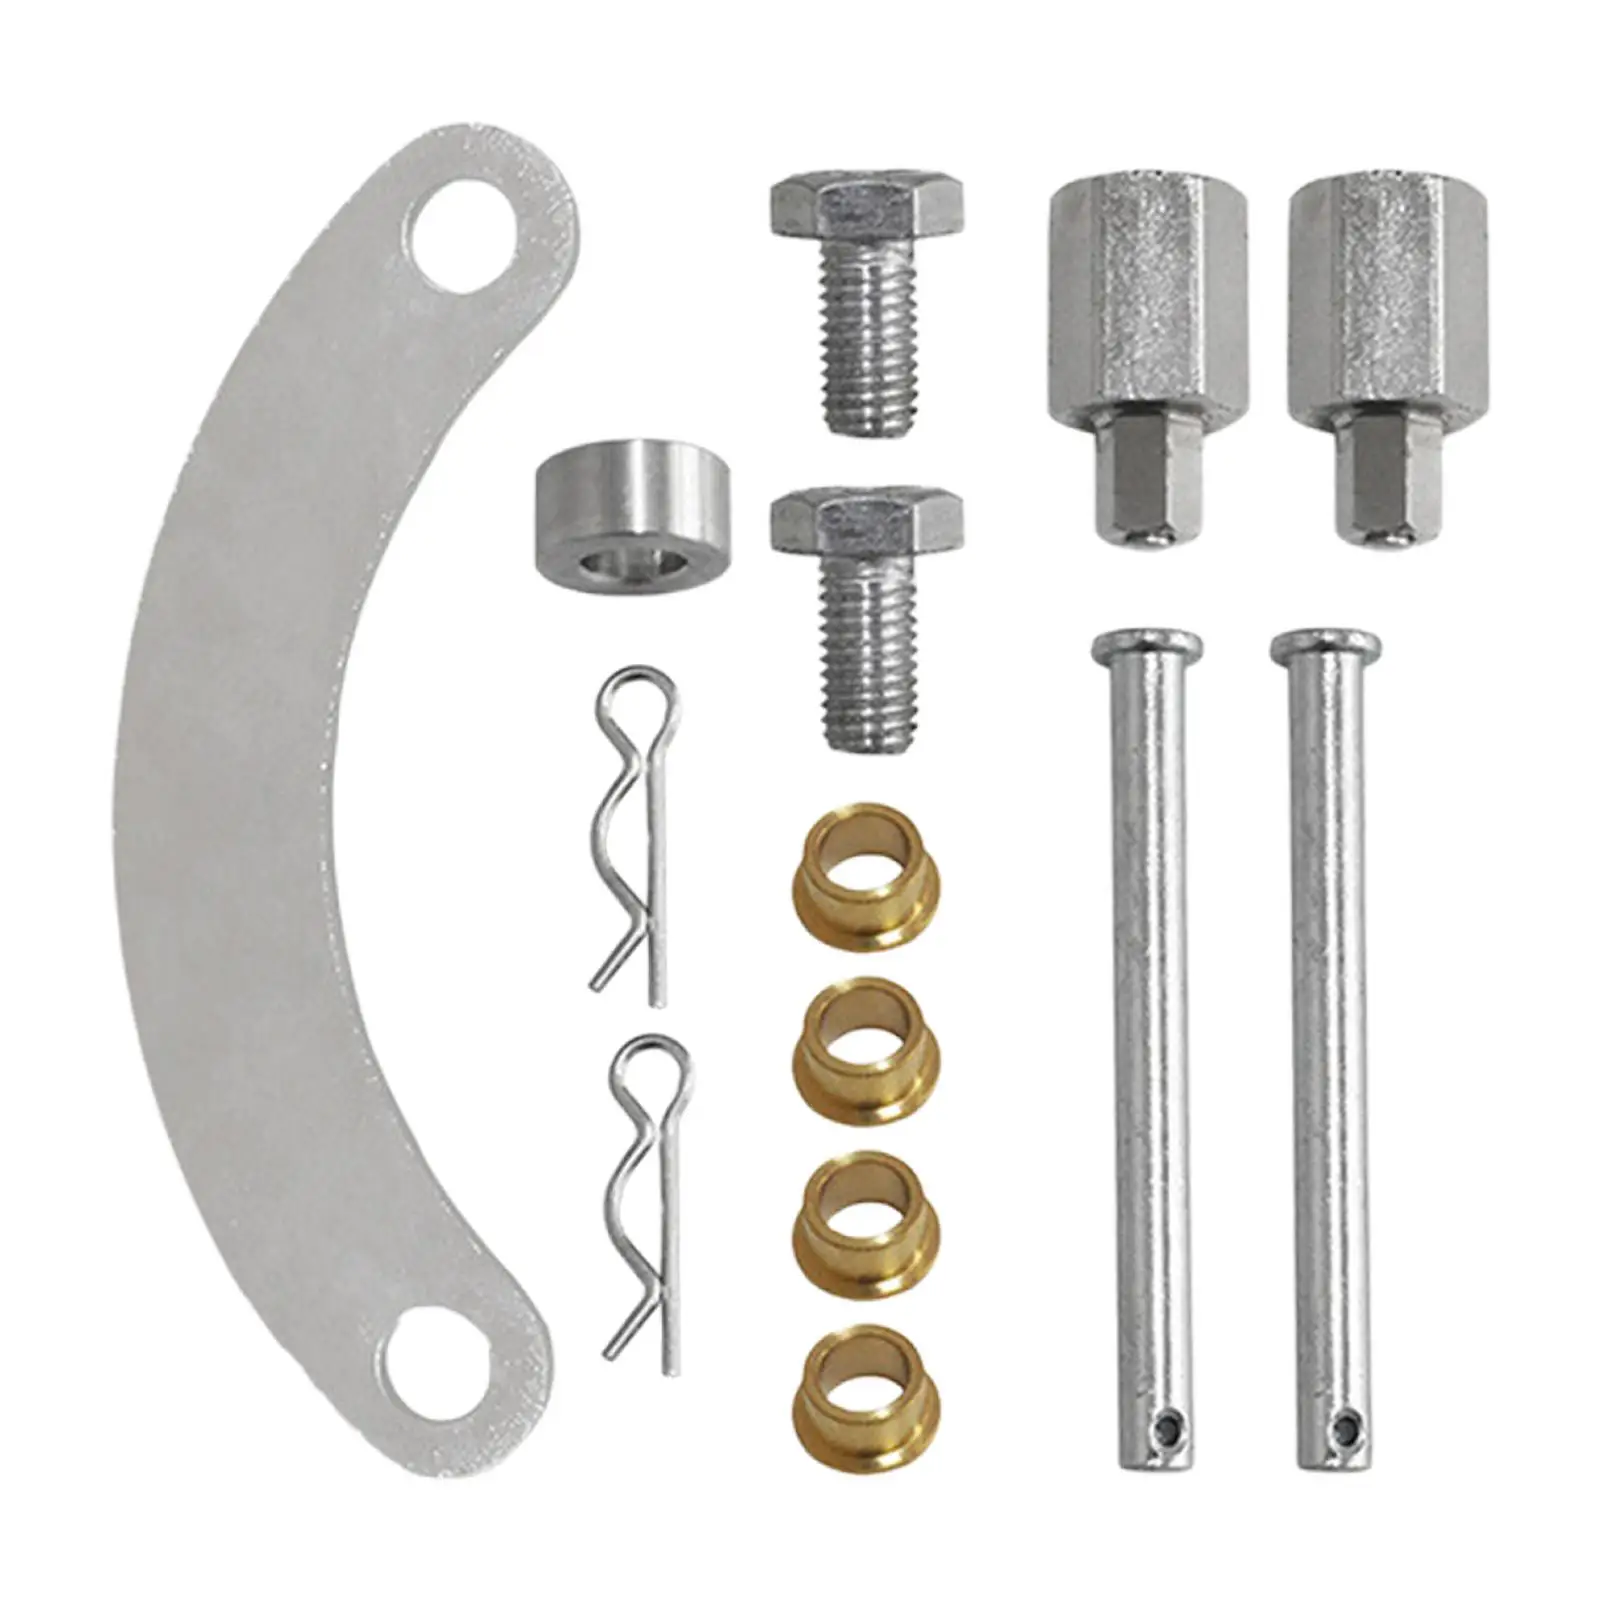 cam Gear Lock set Replaces Accessories for Subaru WRX Sti Fxt Lgt Durable Assembly Professional Easy to Install